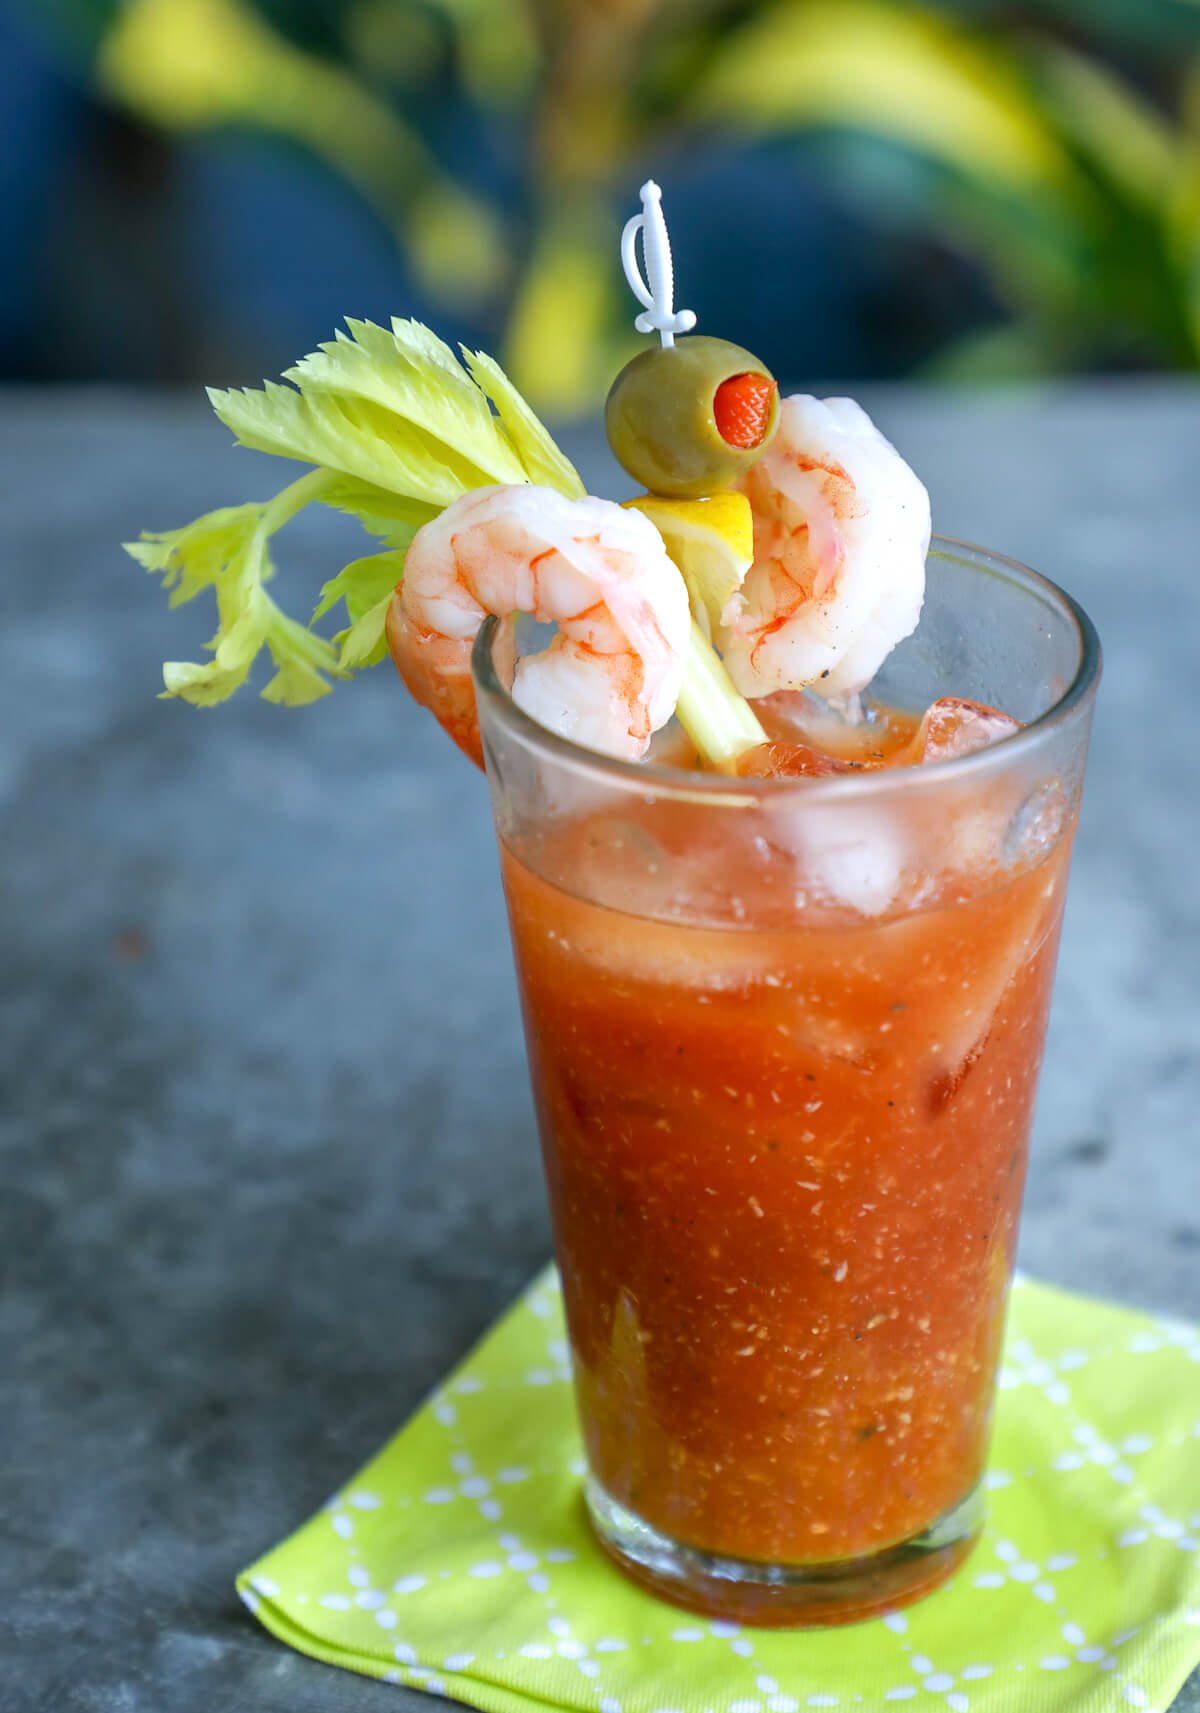 is a bloody mary ok on keto diet